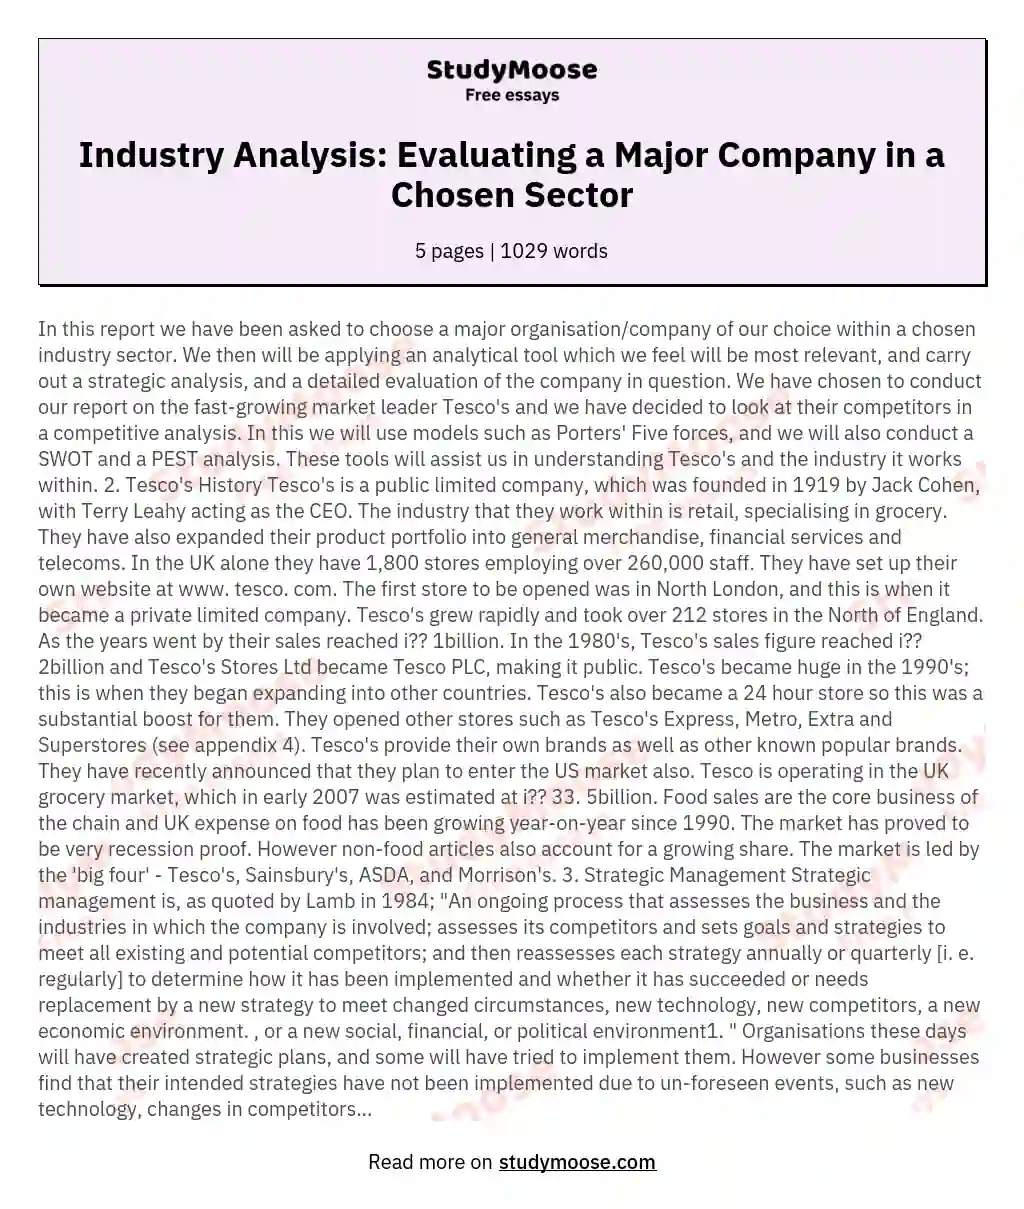 Industry Analysis: Evaluating a Major Company in a Chosen Sector essay